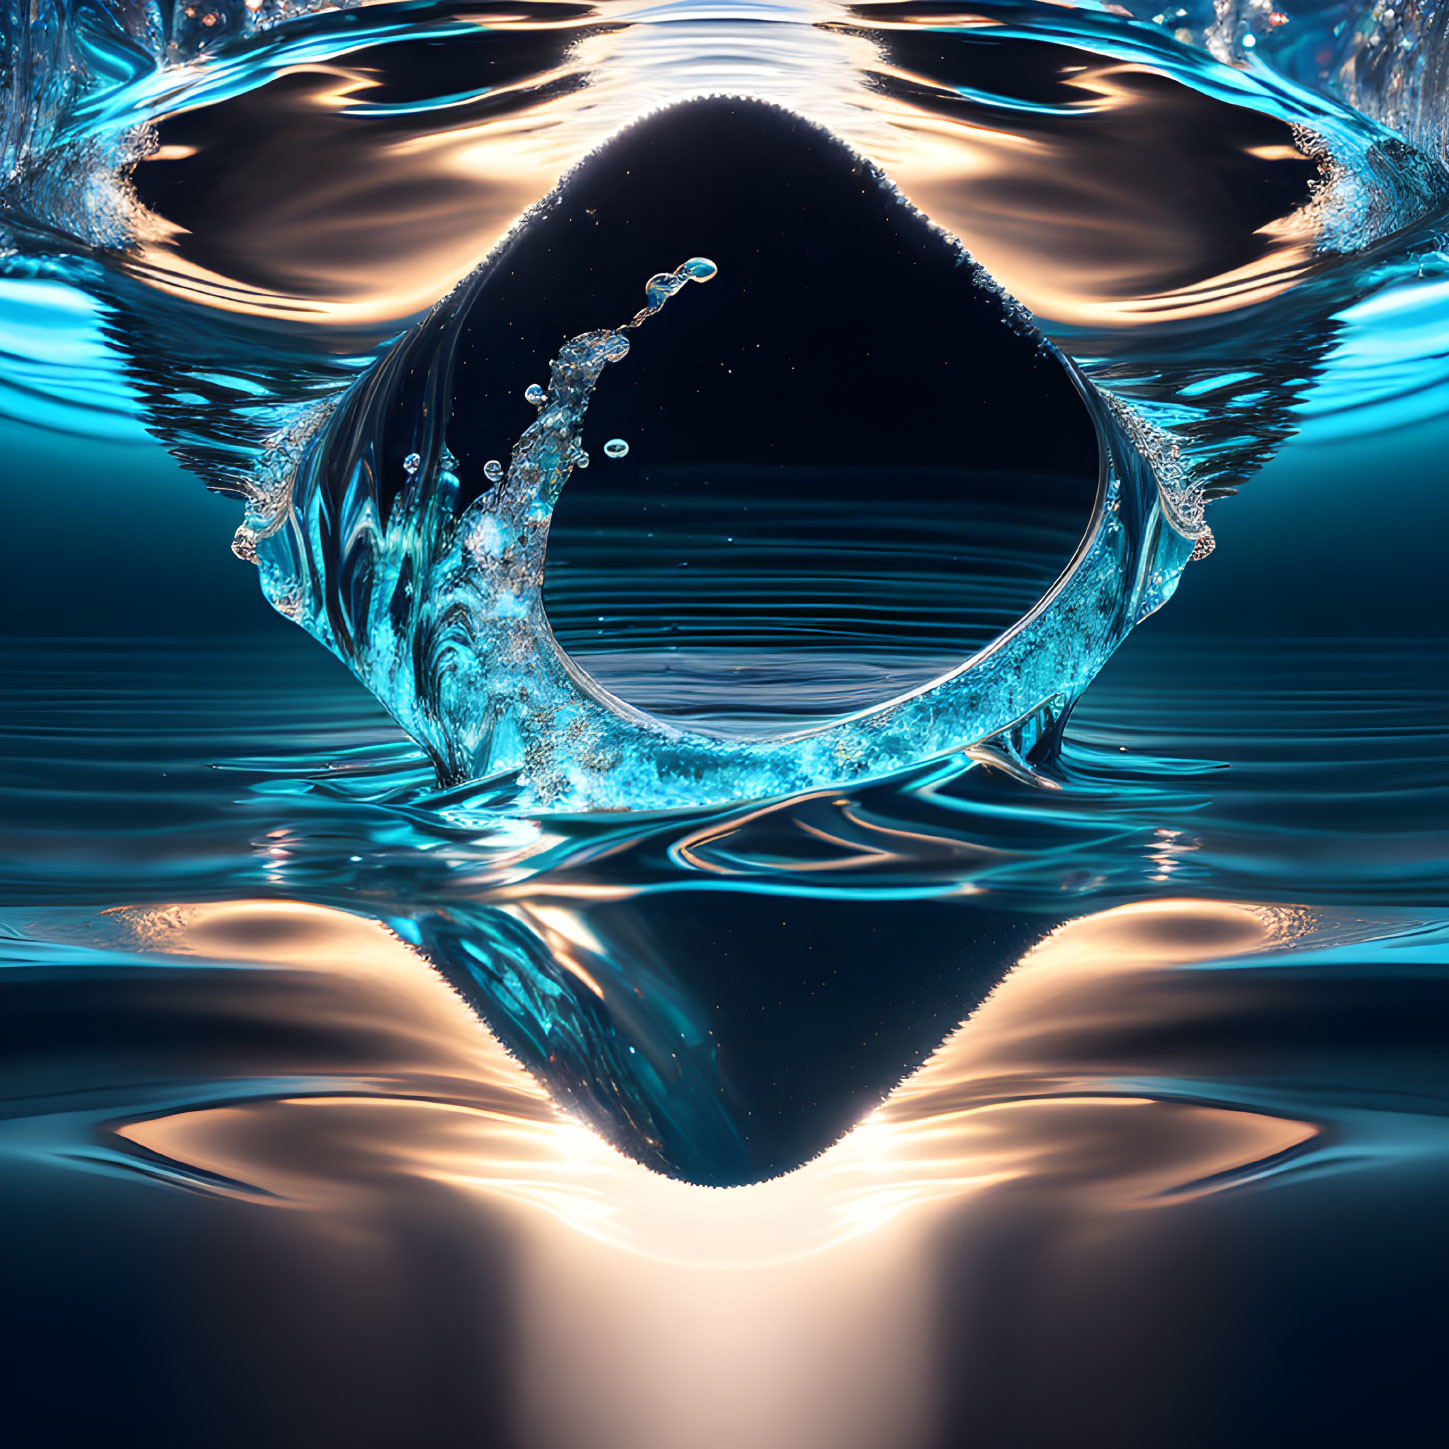 Symmetrical water splash with droplet in high-definition capture